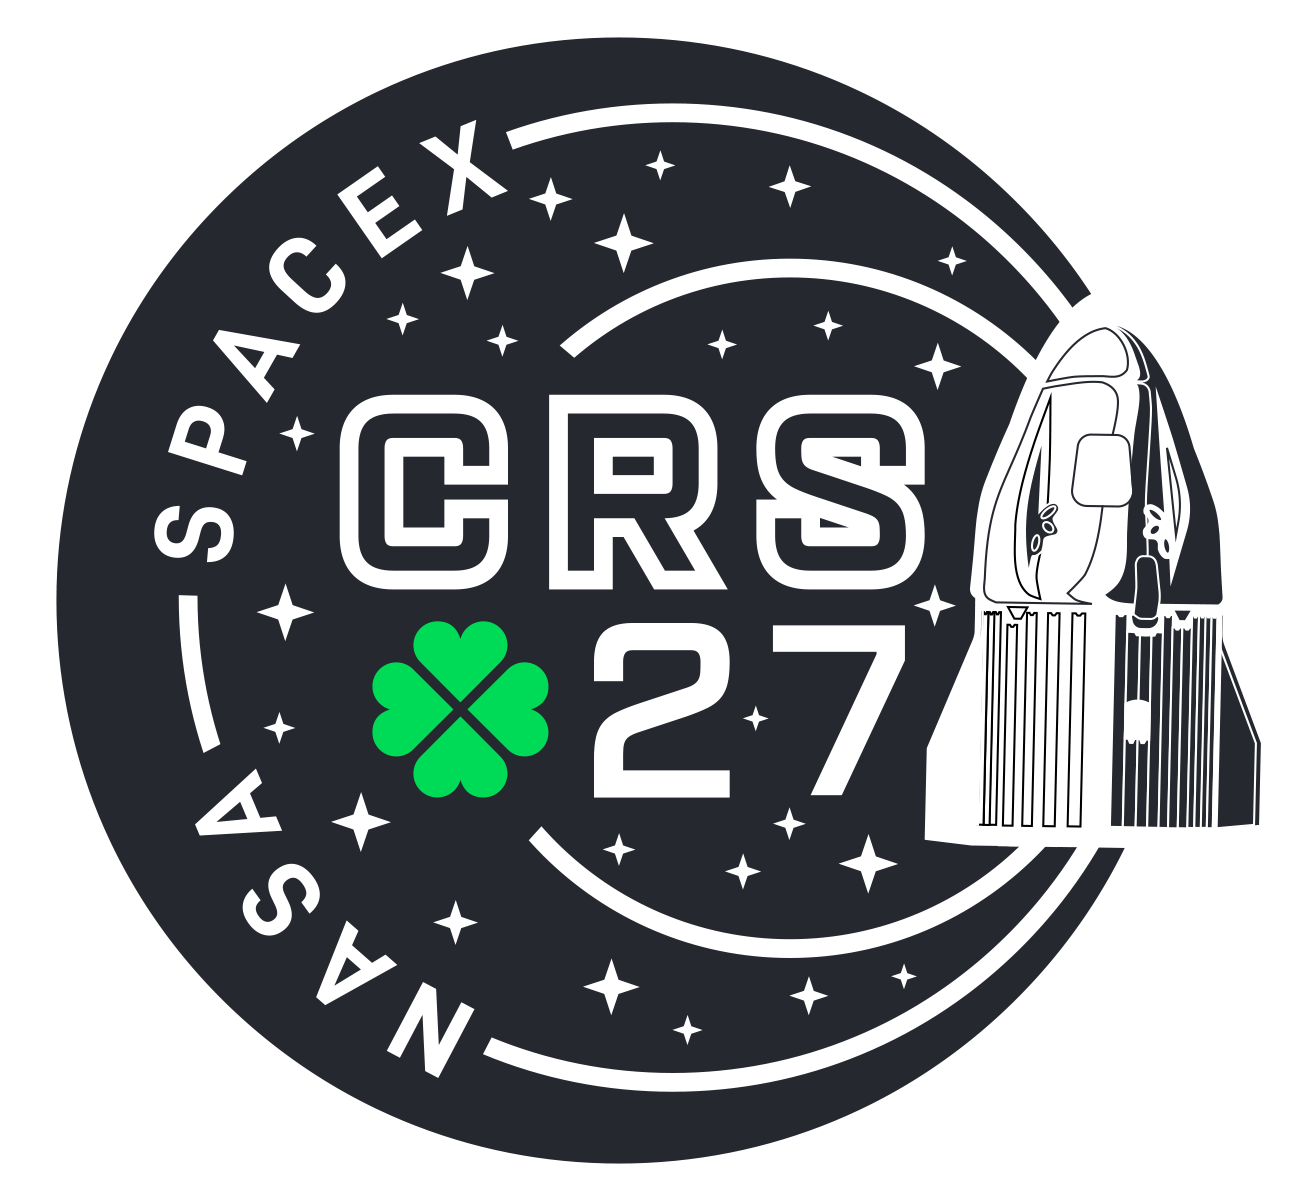 Mission patch for Dragon CRS-2 SpX-27